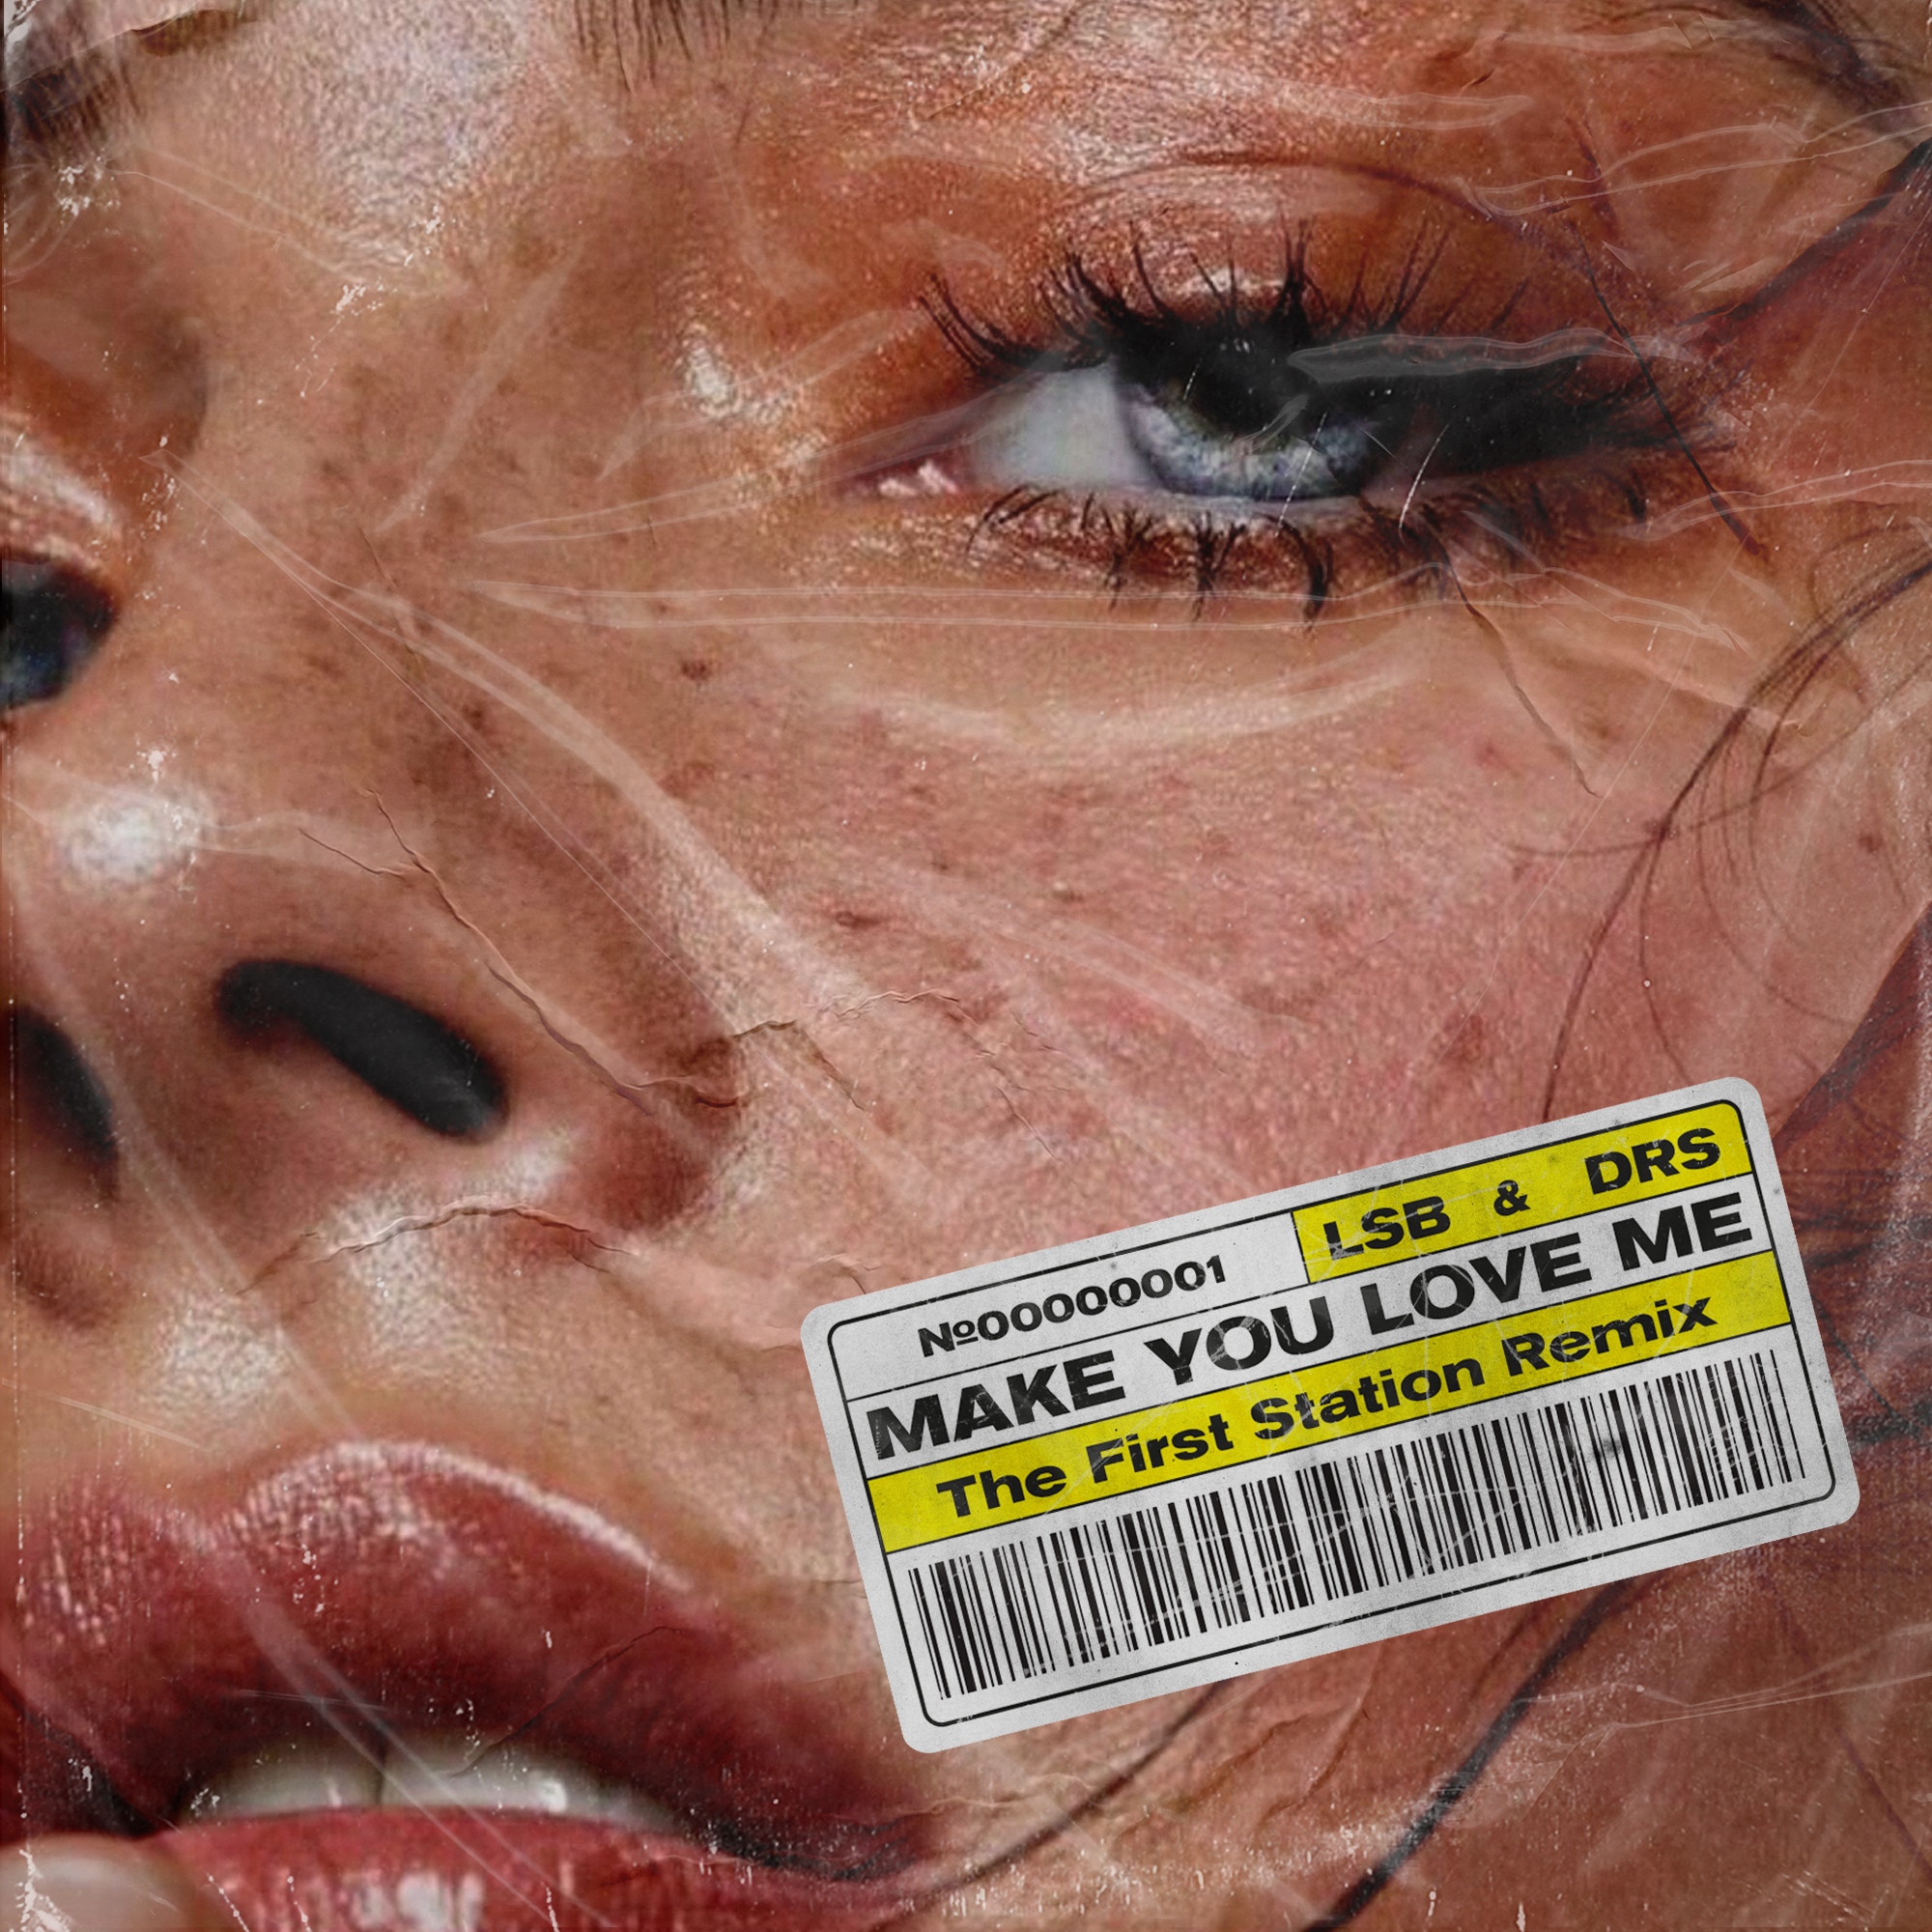 LSB, DRS - Make You Love Me (The First Station Remix)